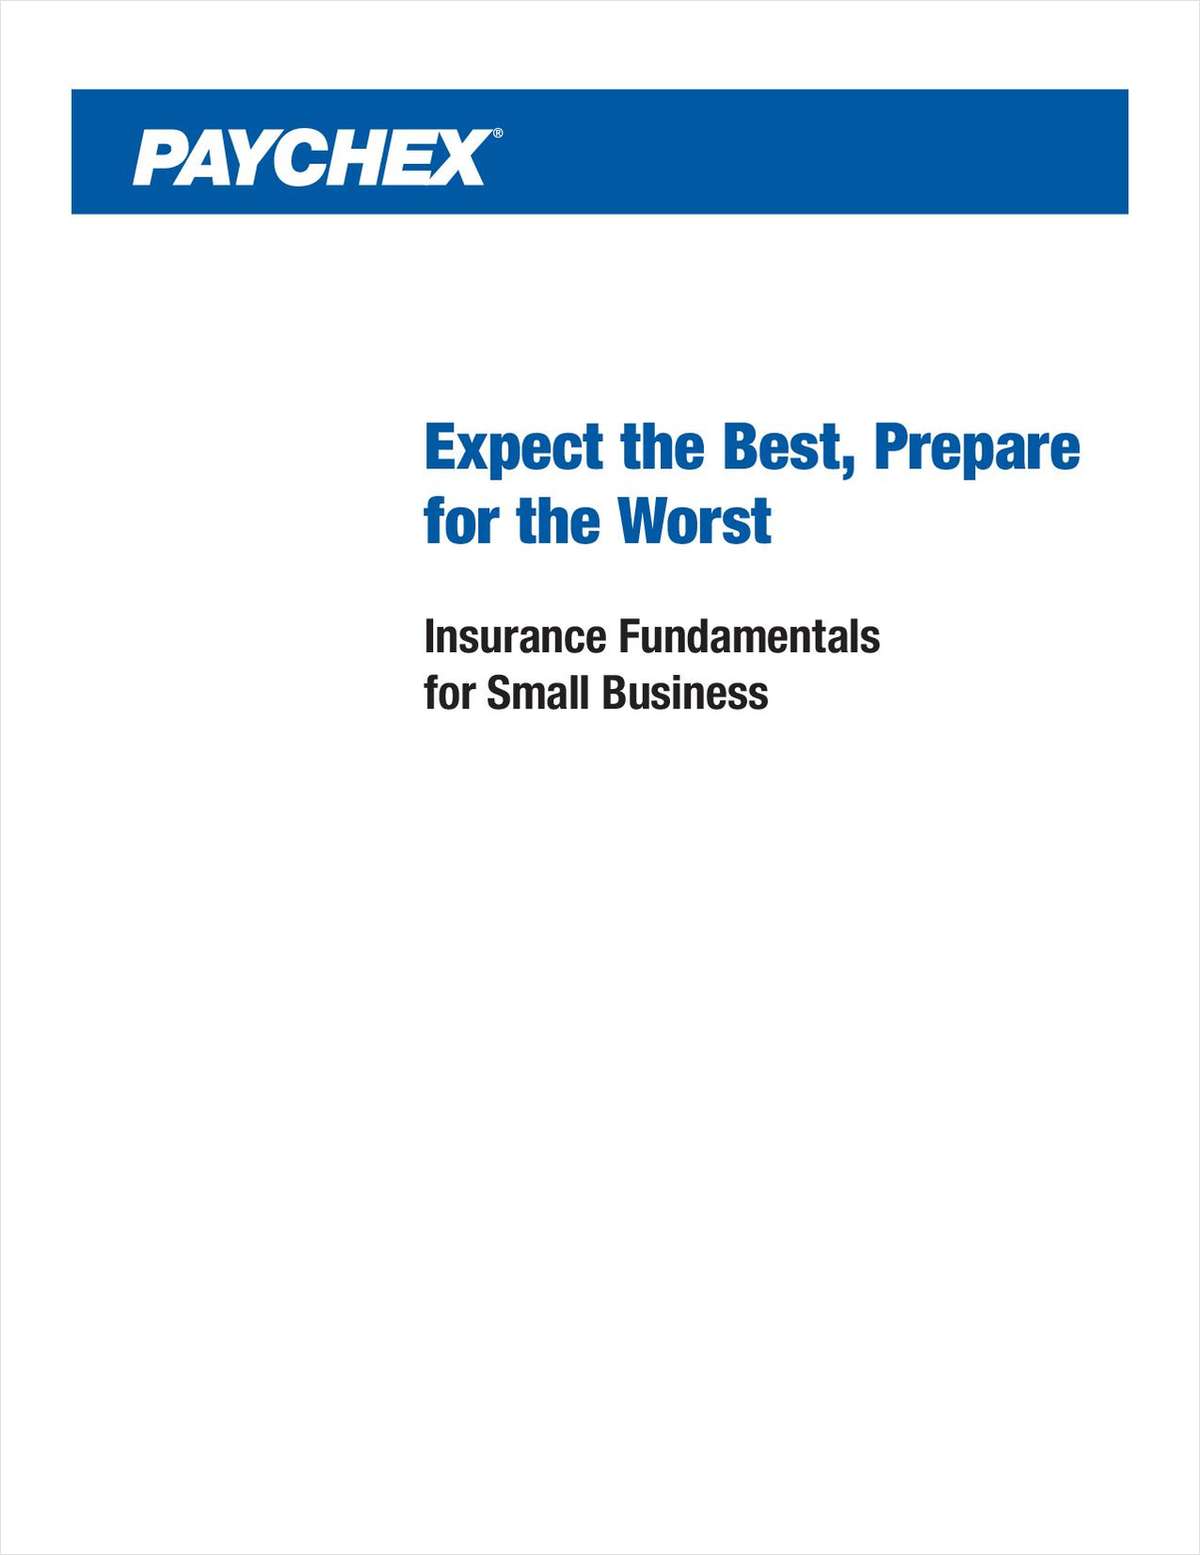 Expect the Best, Prepare for the Worst: Insurance Fundamentals for Small Business